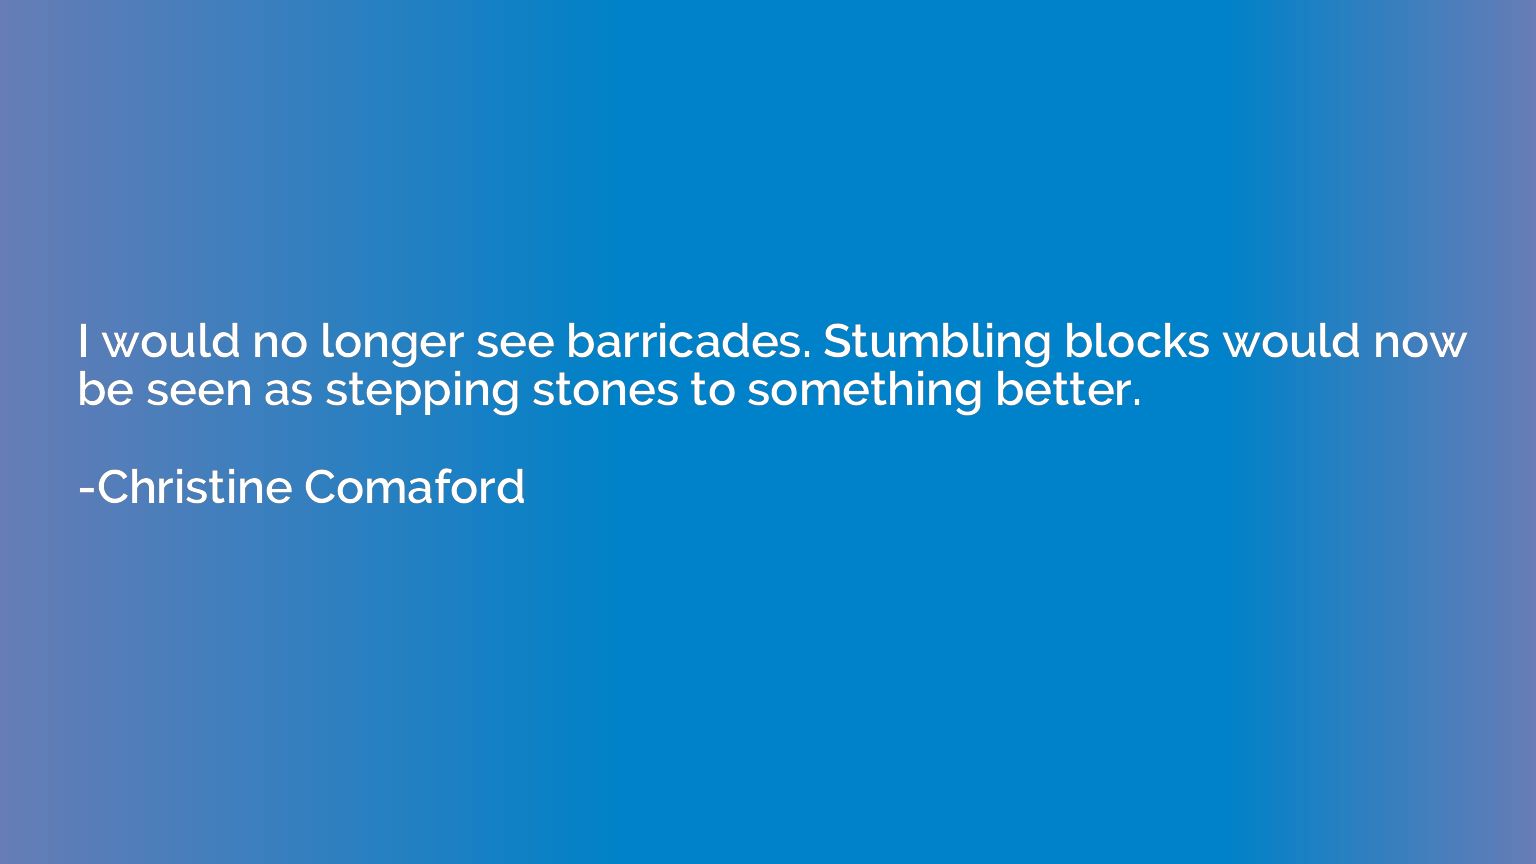 I would no longer see barricades. Stumbling blocks would now